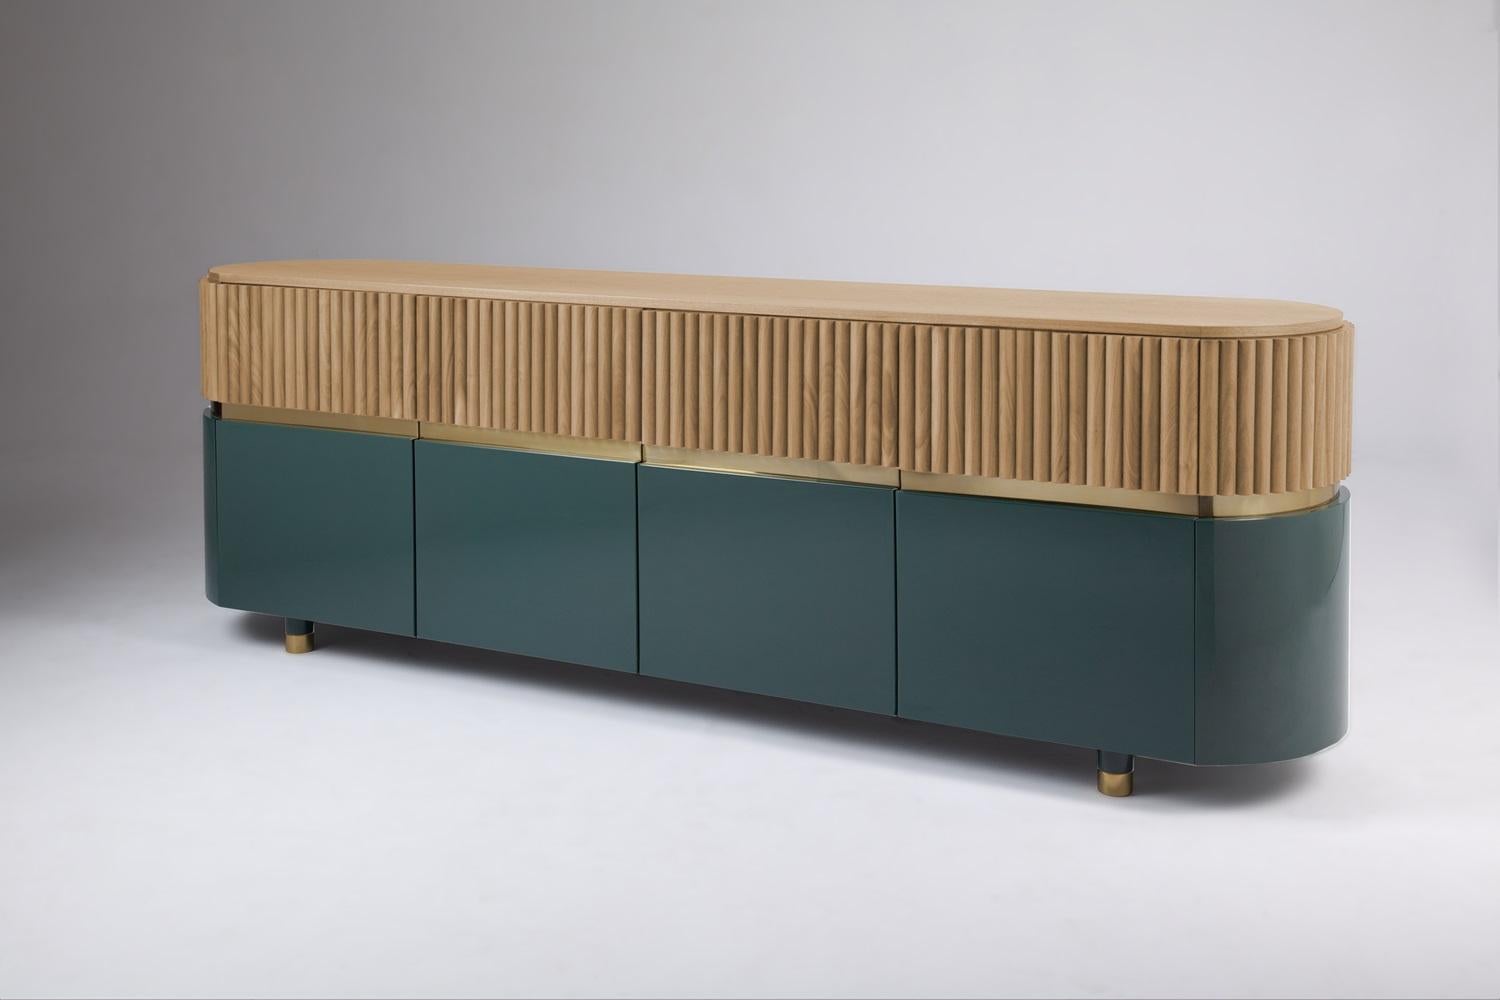 Like its name suggests, Berlin sideboard is inspired by Bauhaus, a wave of thought that is impossible to overlook when passing through the streets of Berlin. In a more down to earth piece, clean lines and a certain absence of excessive ornamentation